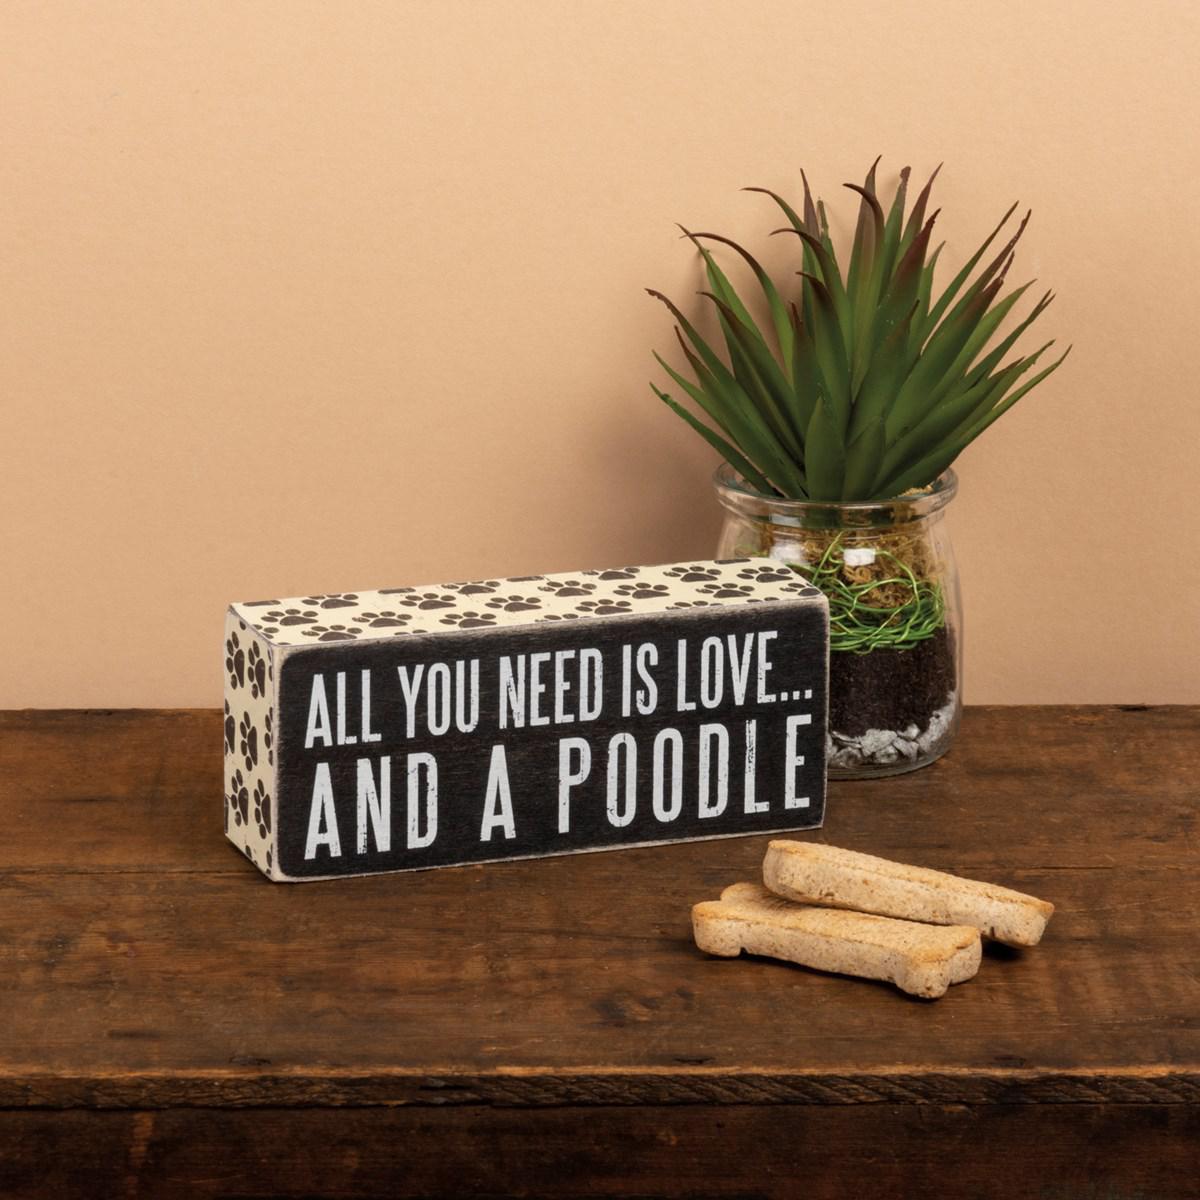 Love and a Poodle